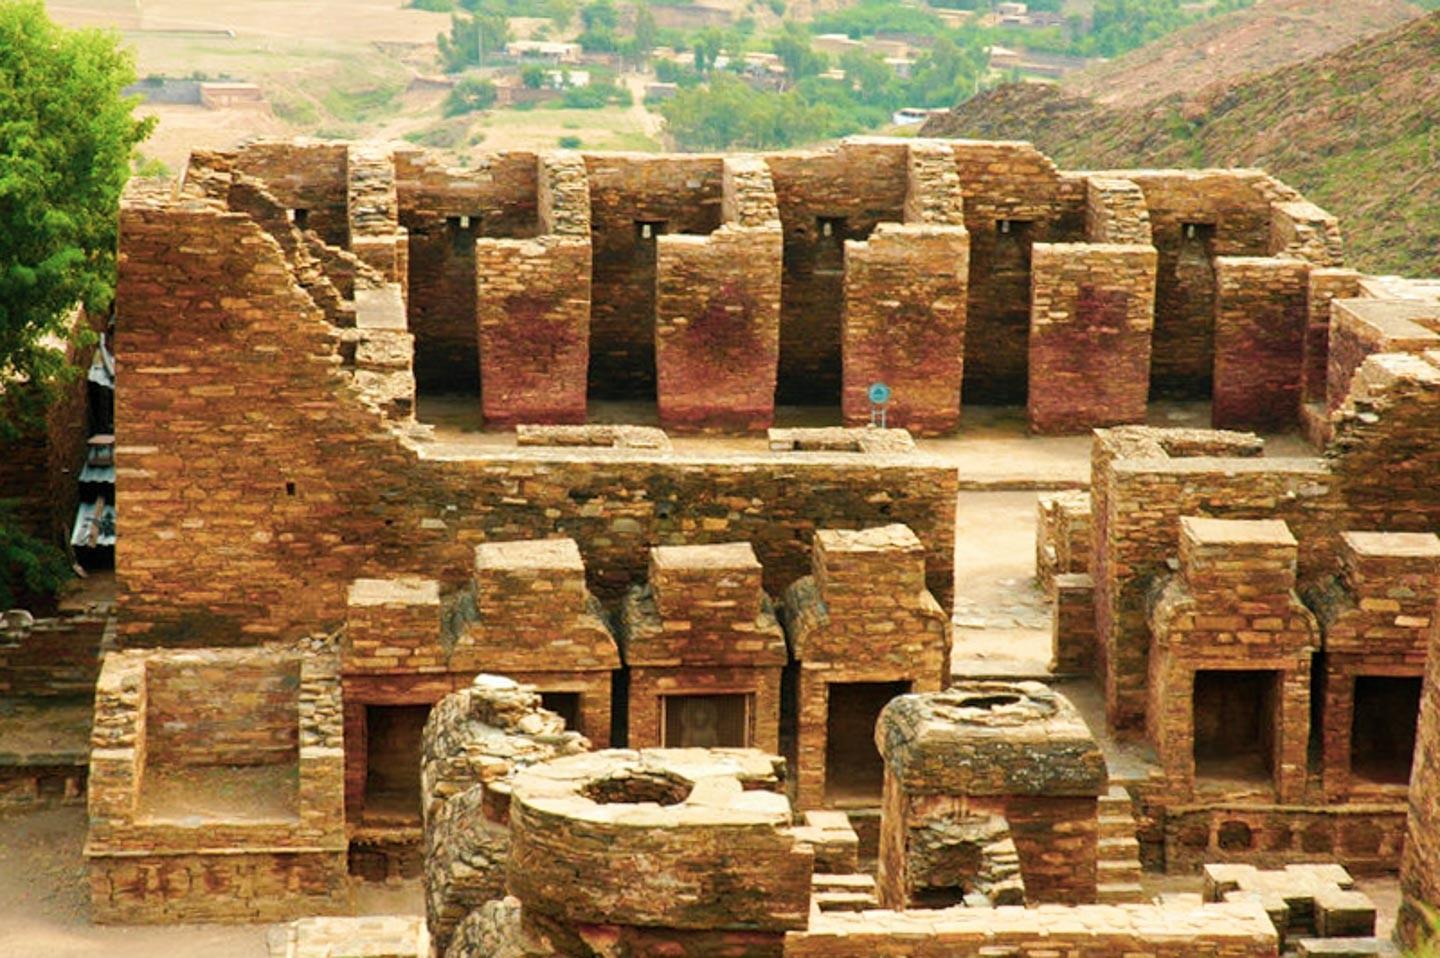 The architecture of Takht-i-Bahi Complex